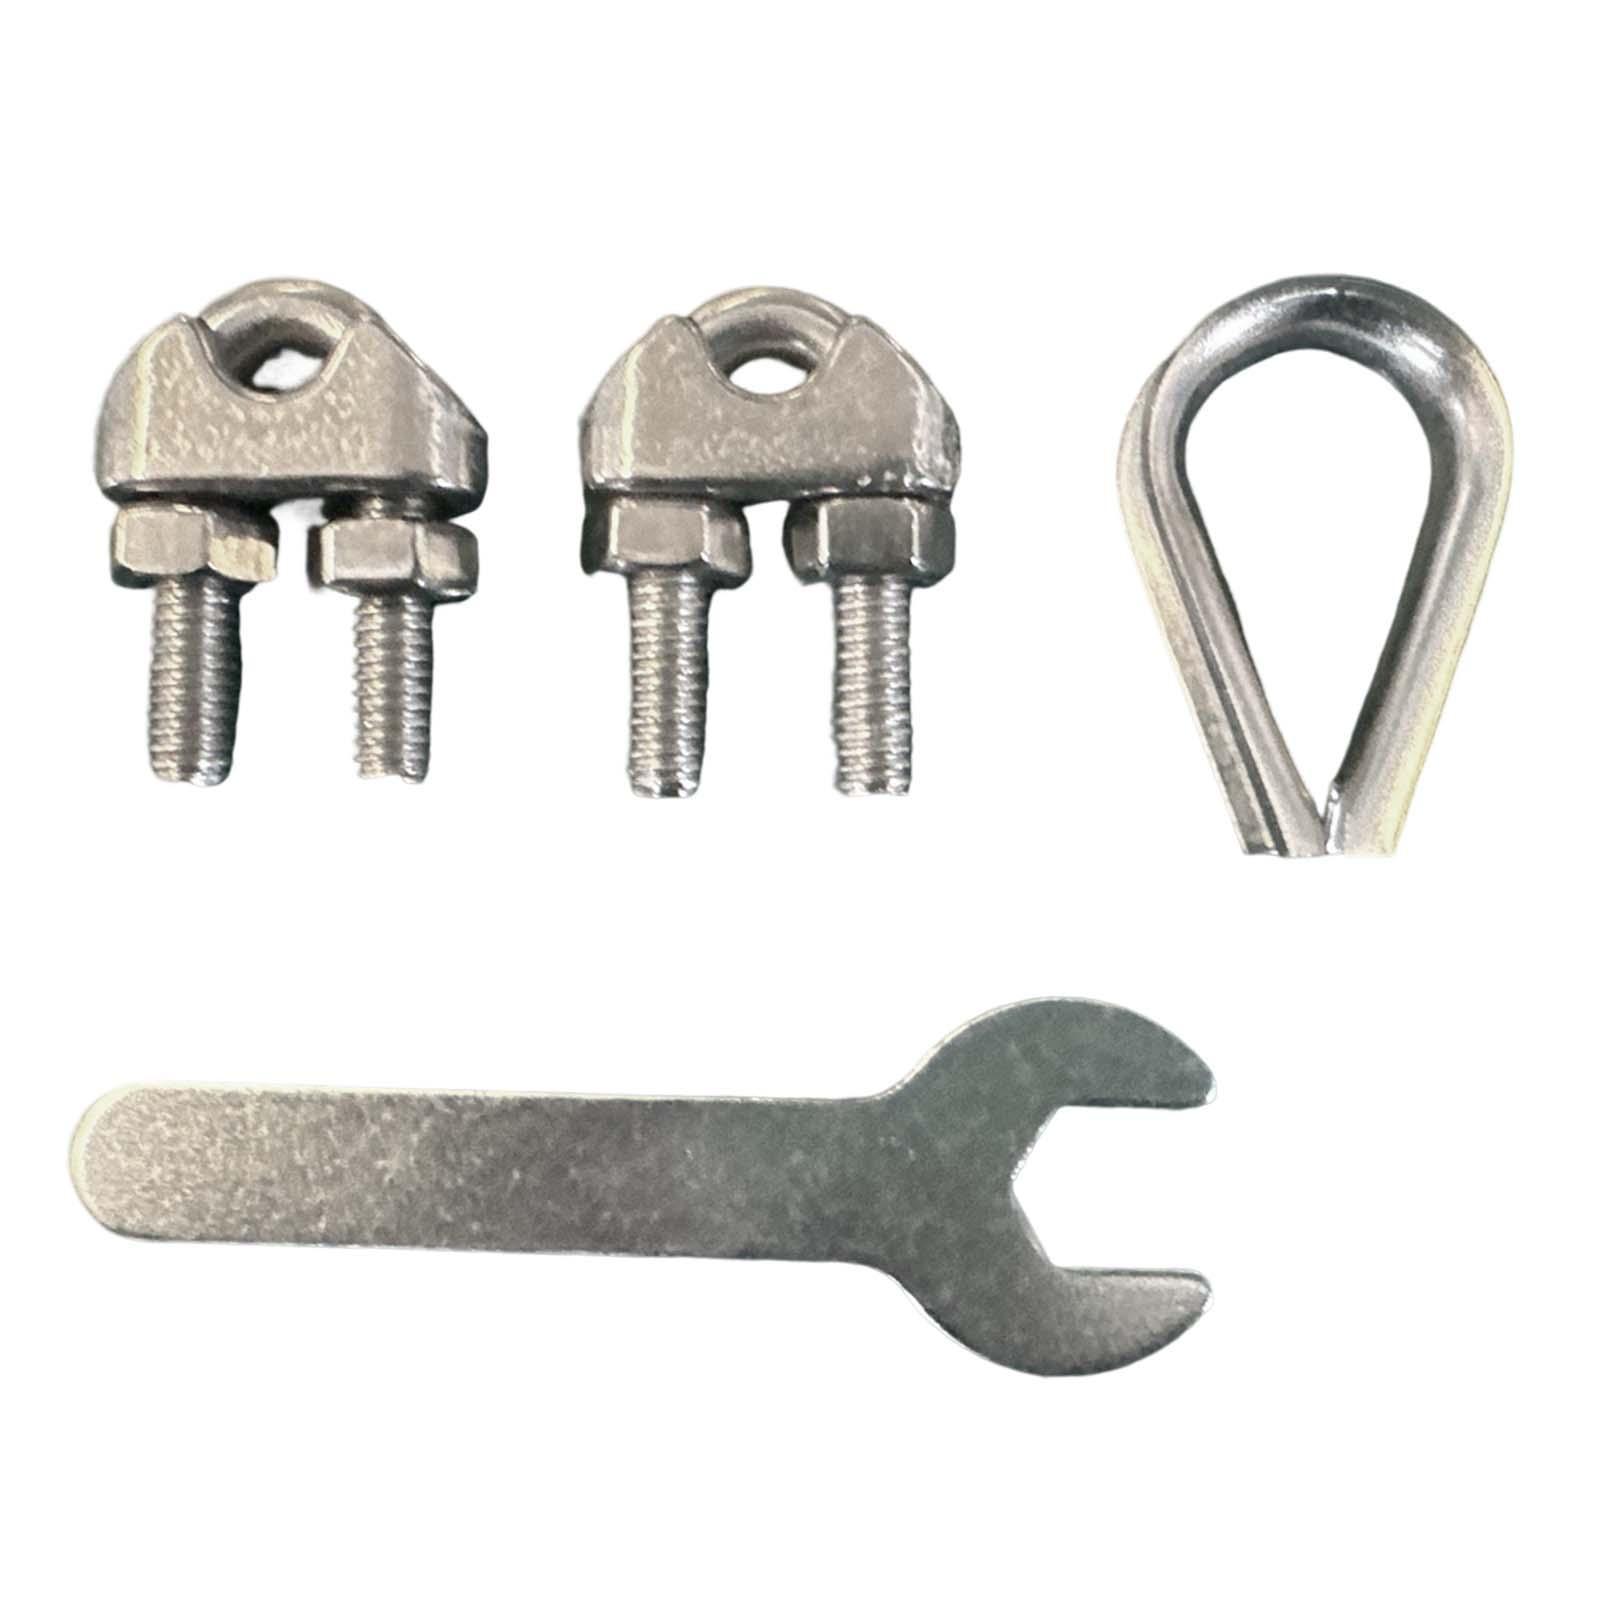 Wire Rope Locks Accessories Set Equipment Gym Training for Gym Machine Cable Weight Cable